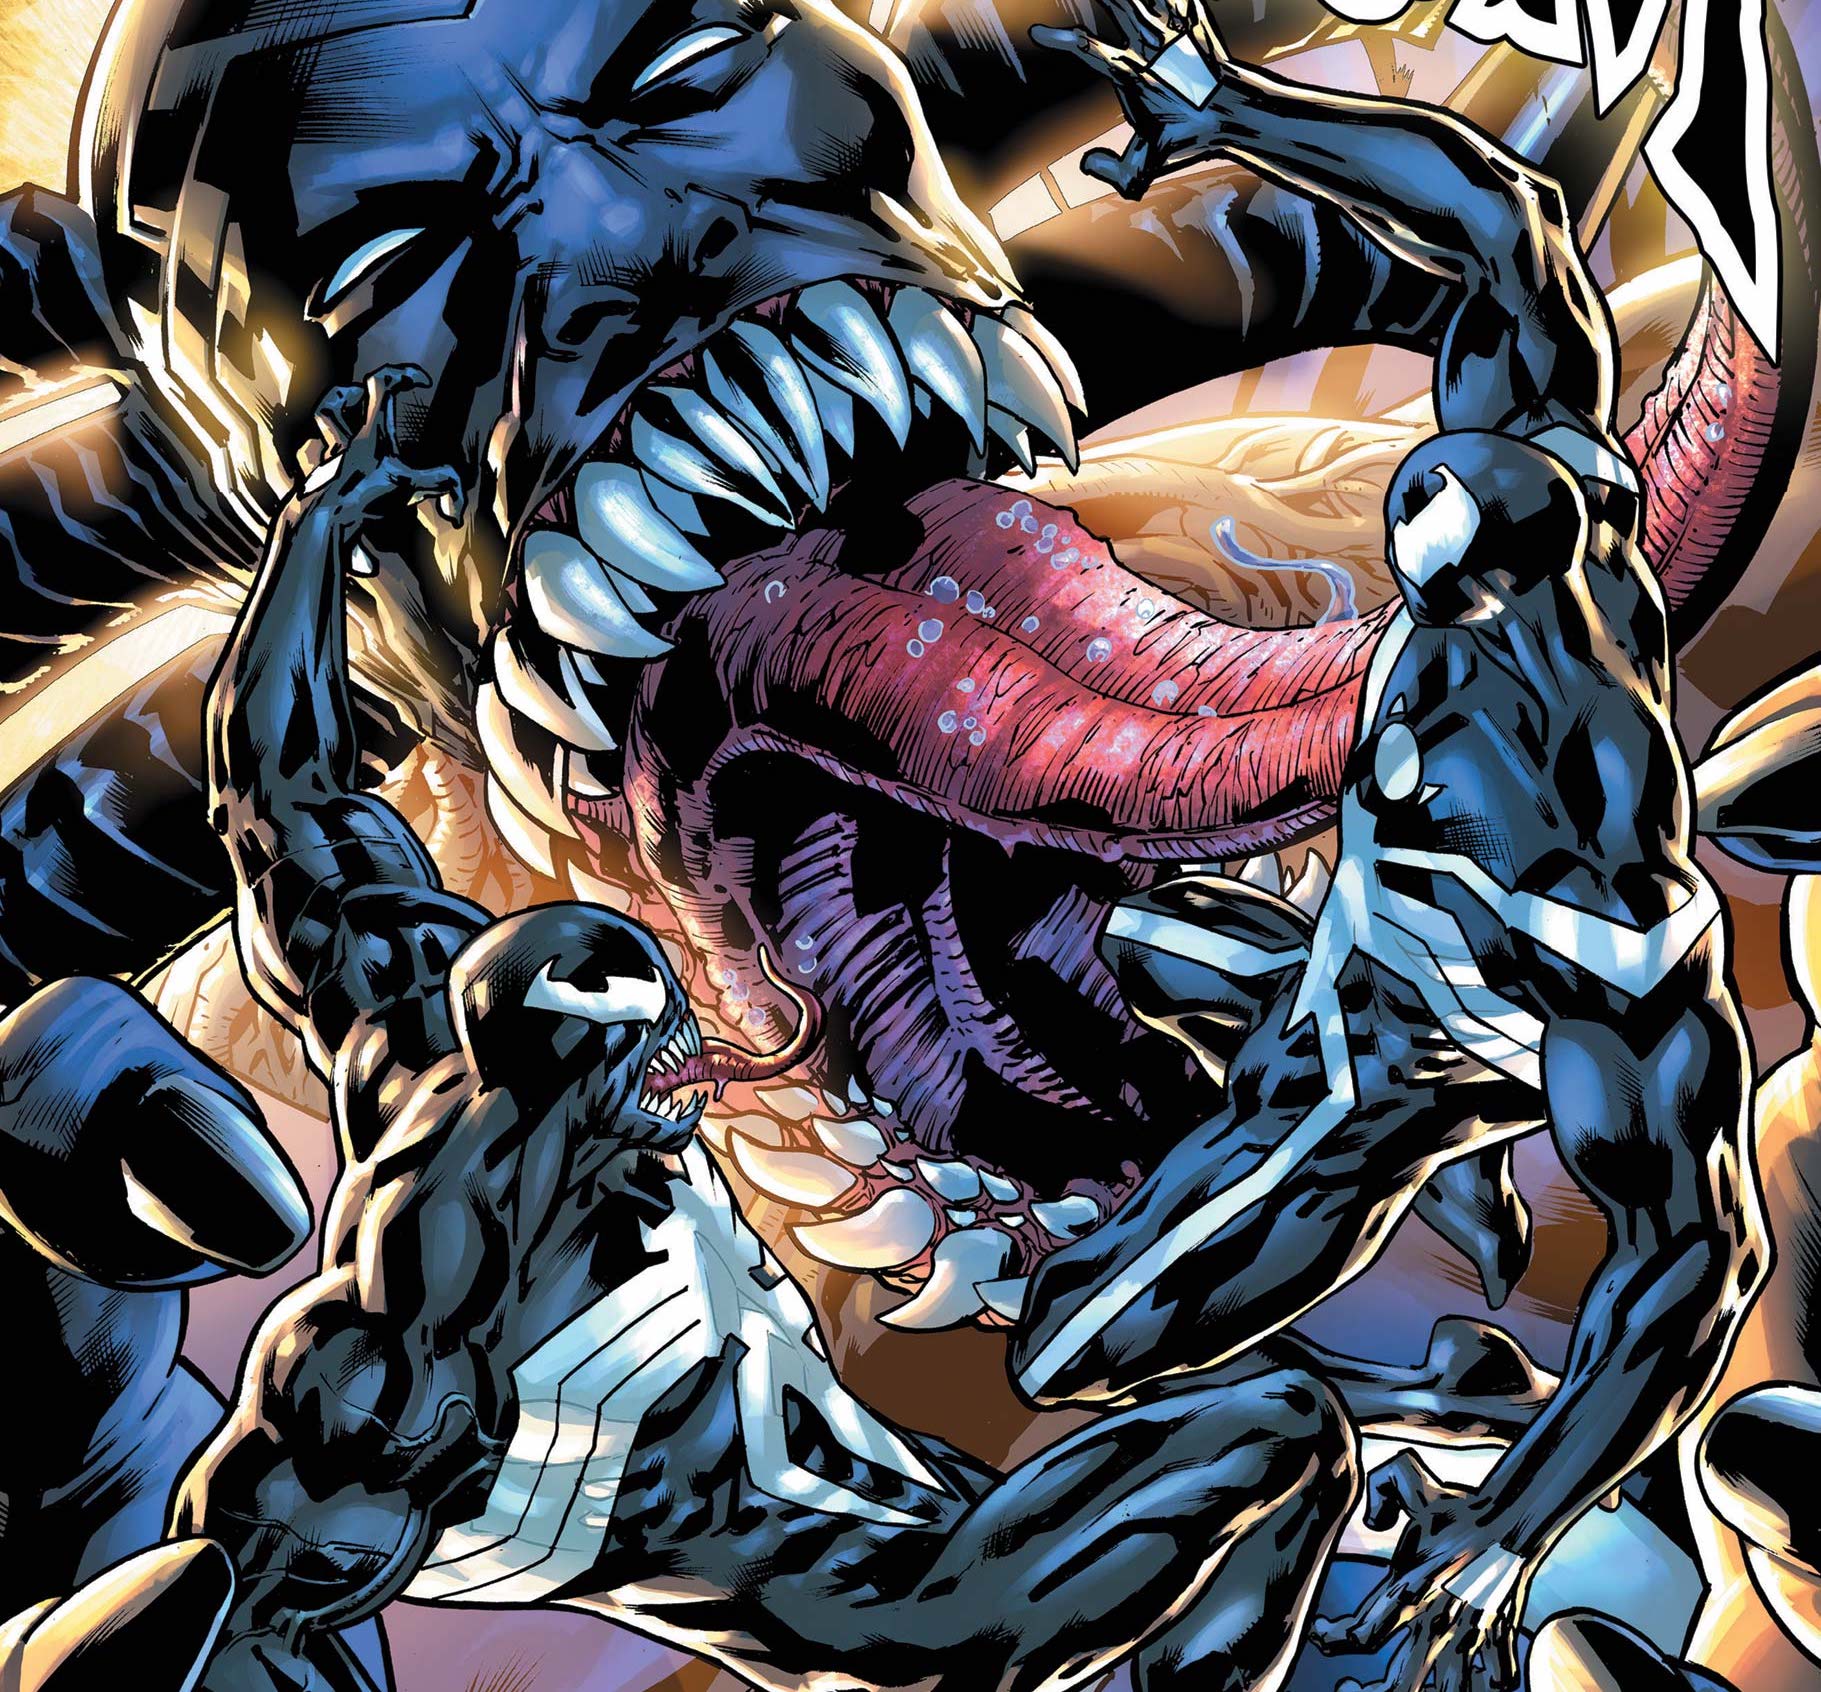 'Venom' #10 continues to evolve the character with big twists